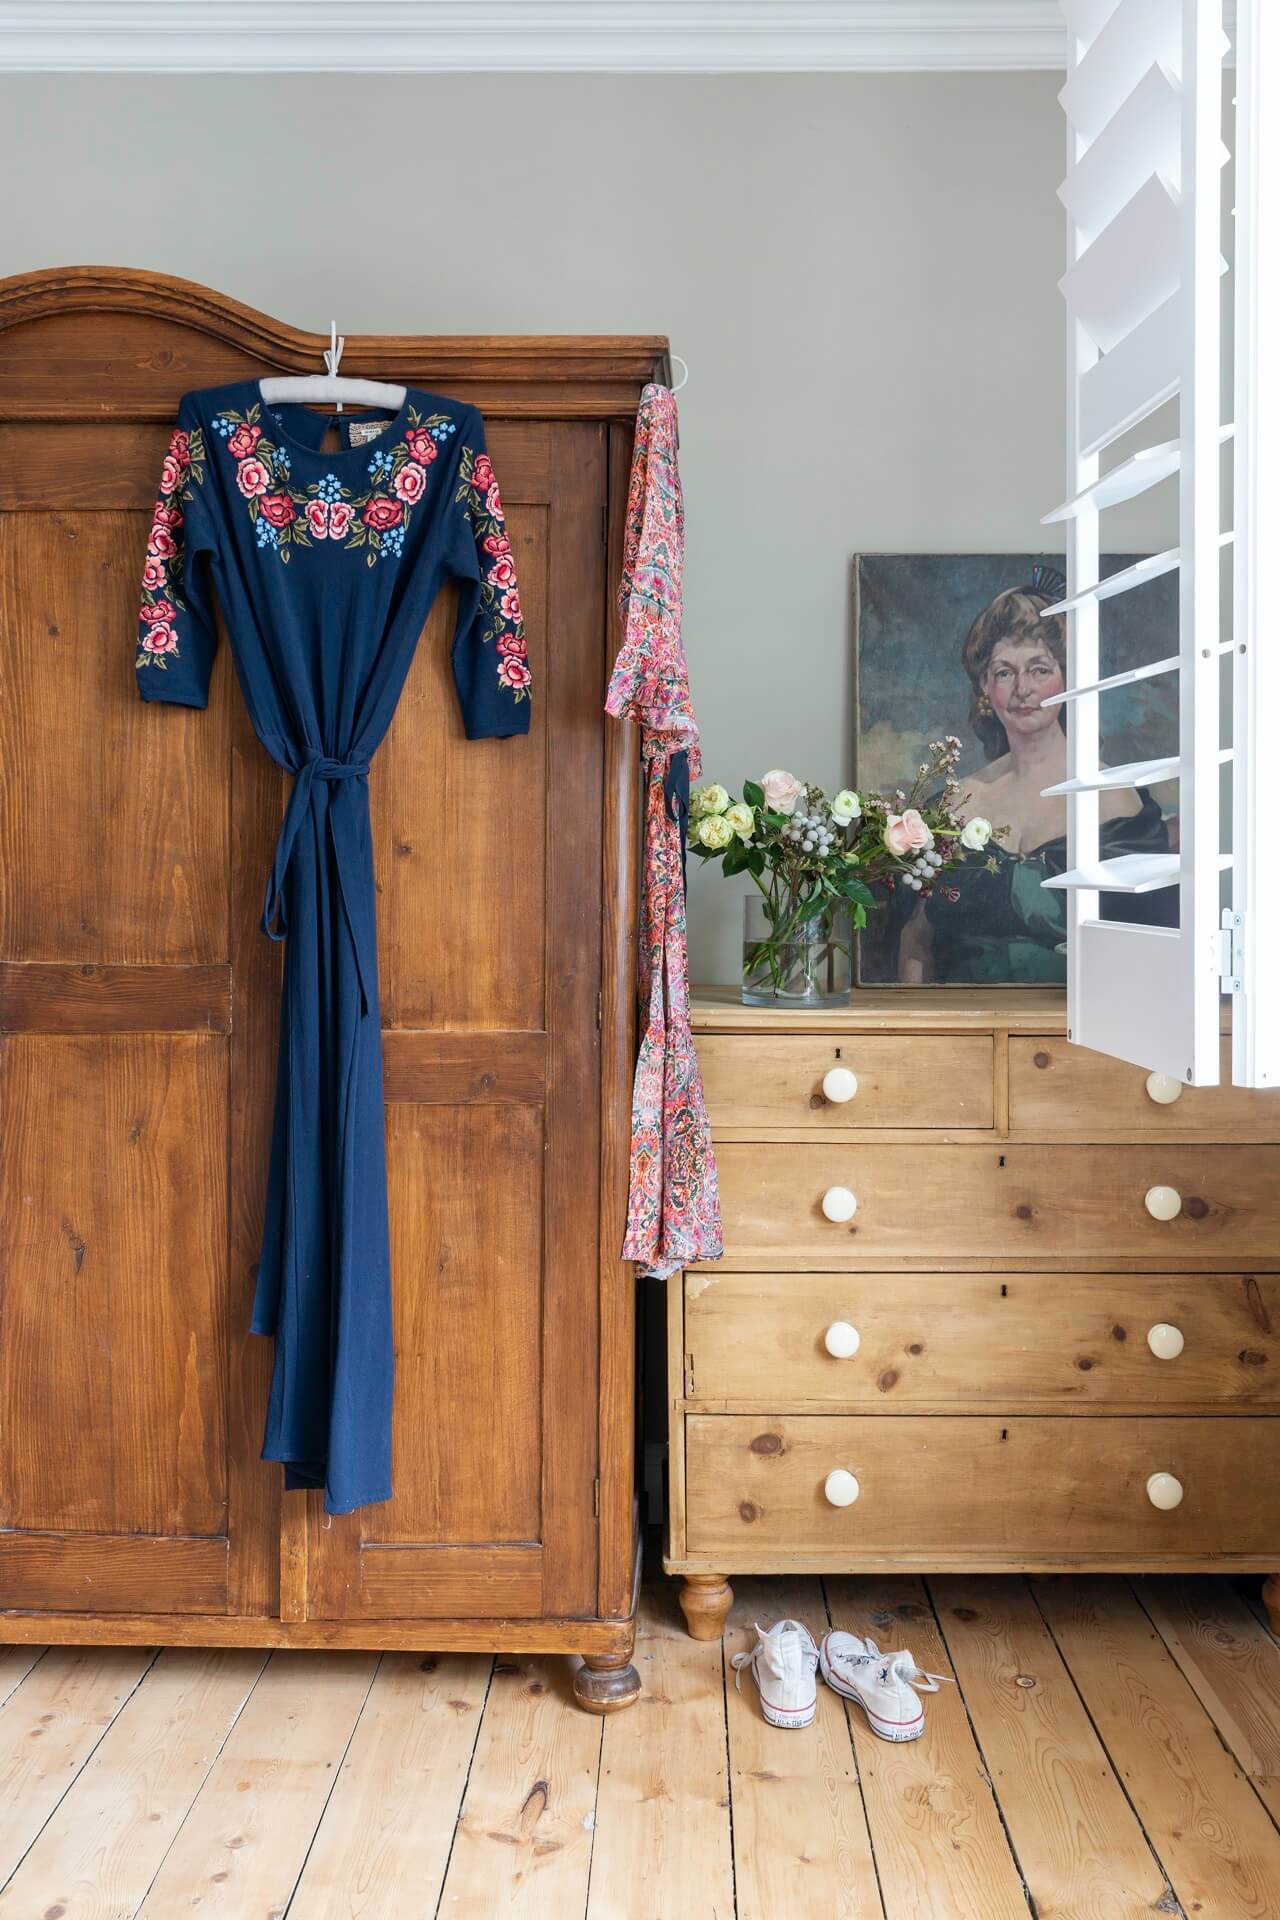 vintage wooden wardrobe and drawers with pretty dress hanging up, flowers and vintage portrait painting on display